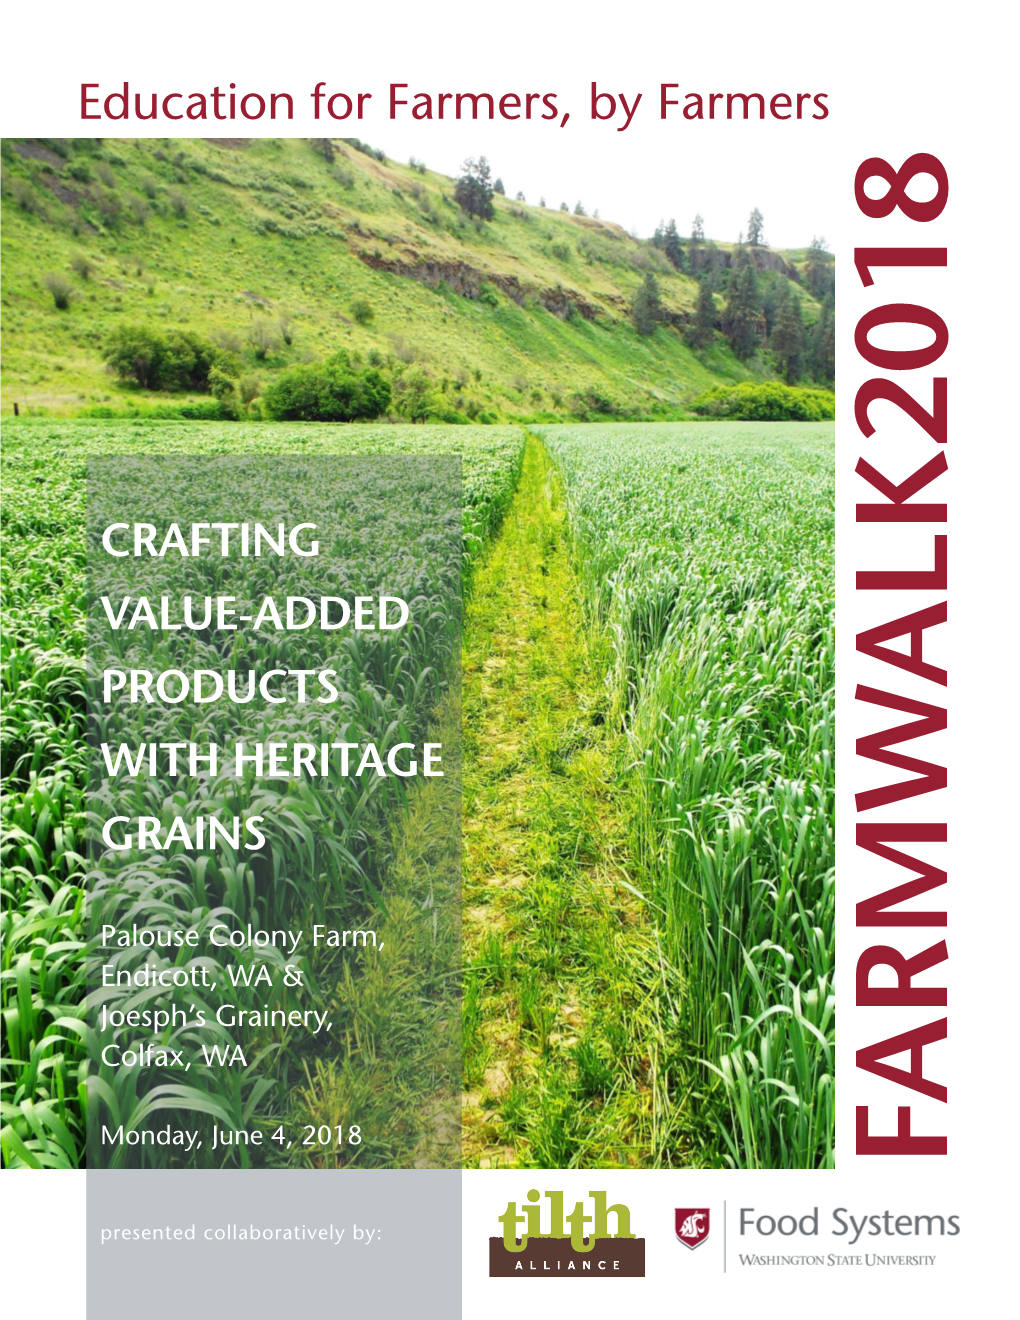 Farm Walk: Crafting Value-Added Products with Heritage Grains